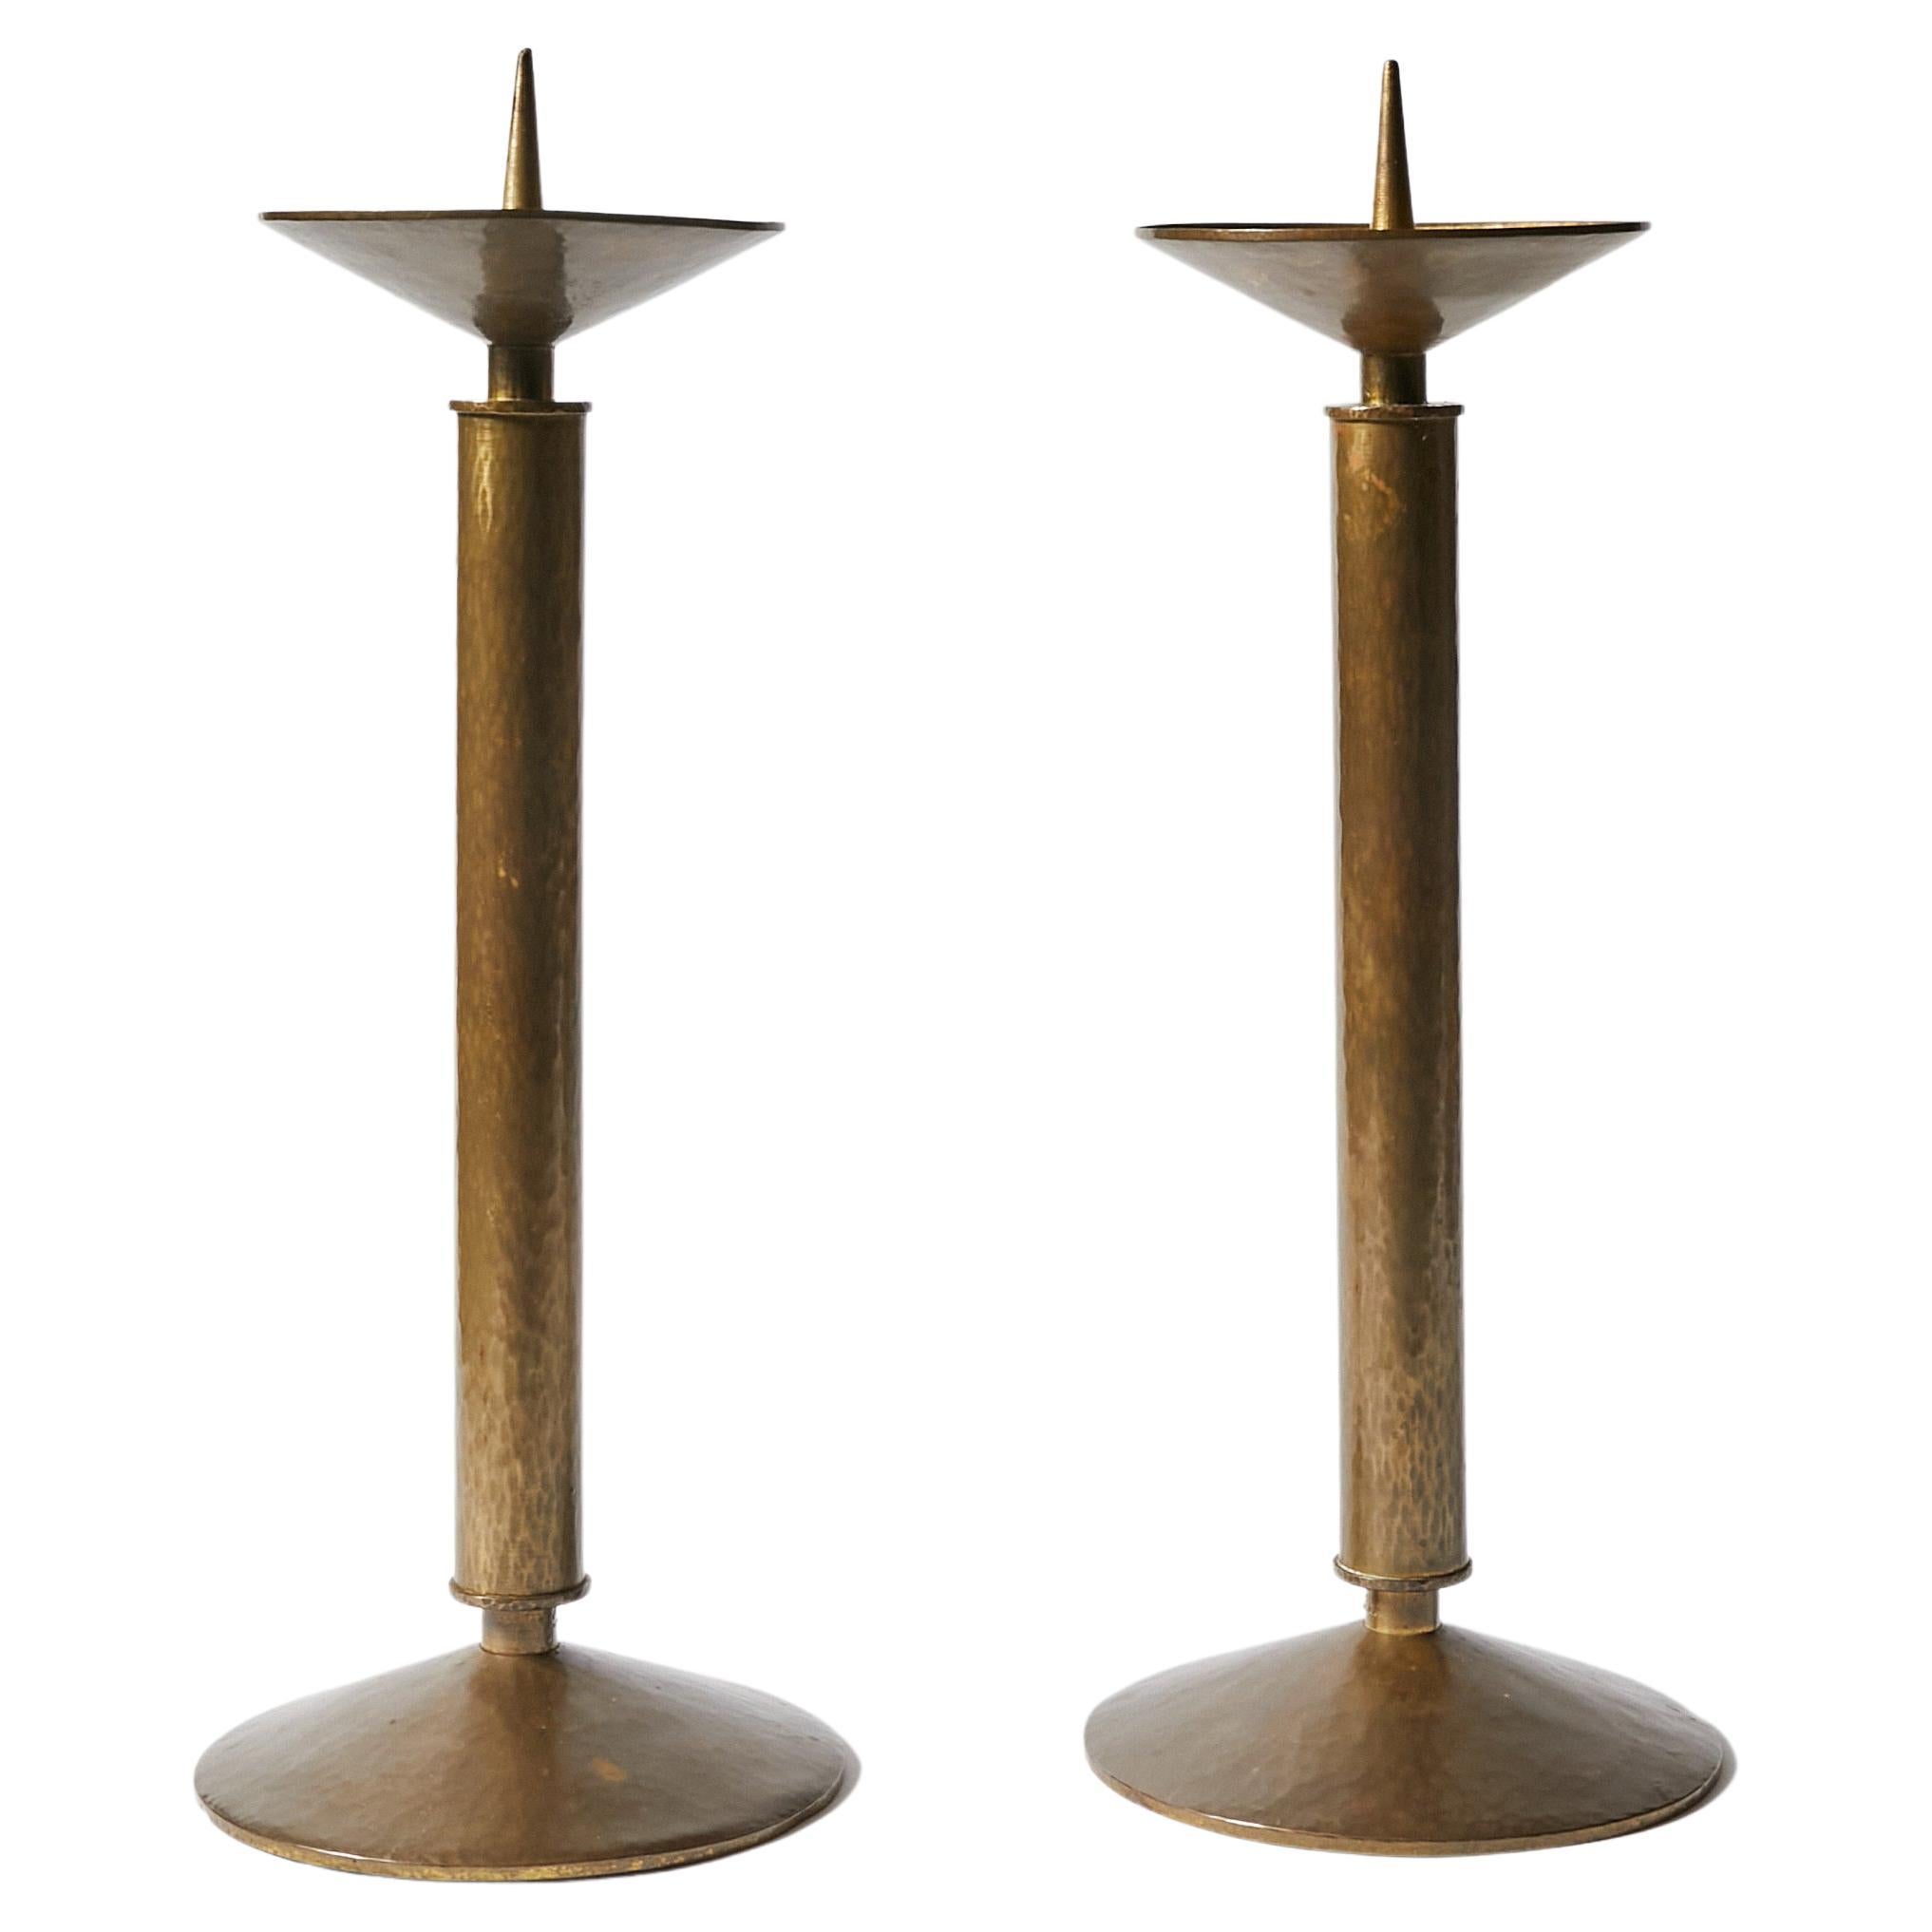 Pair of Large Art Deco Style Candle Holders For Sale